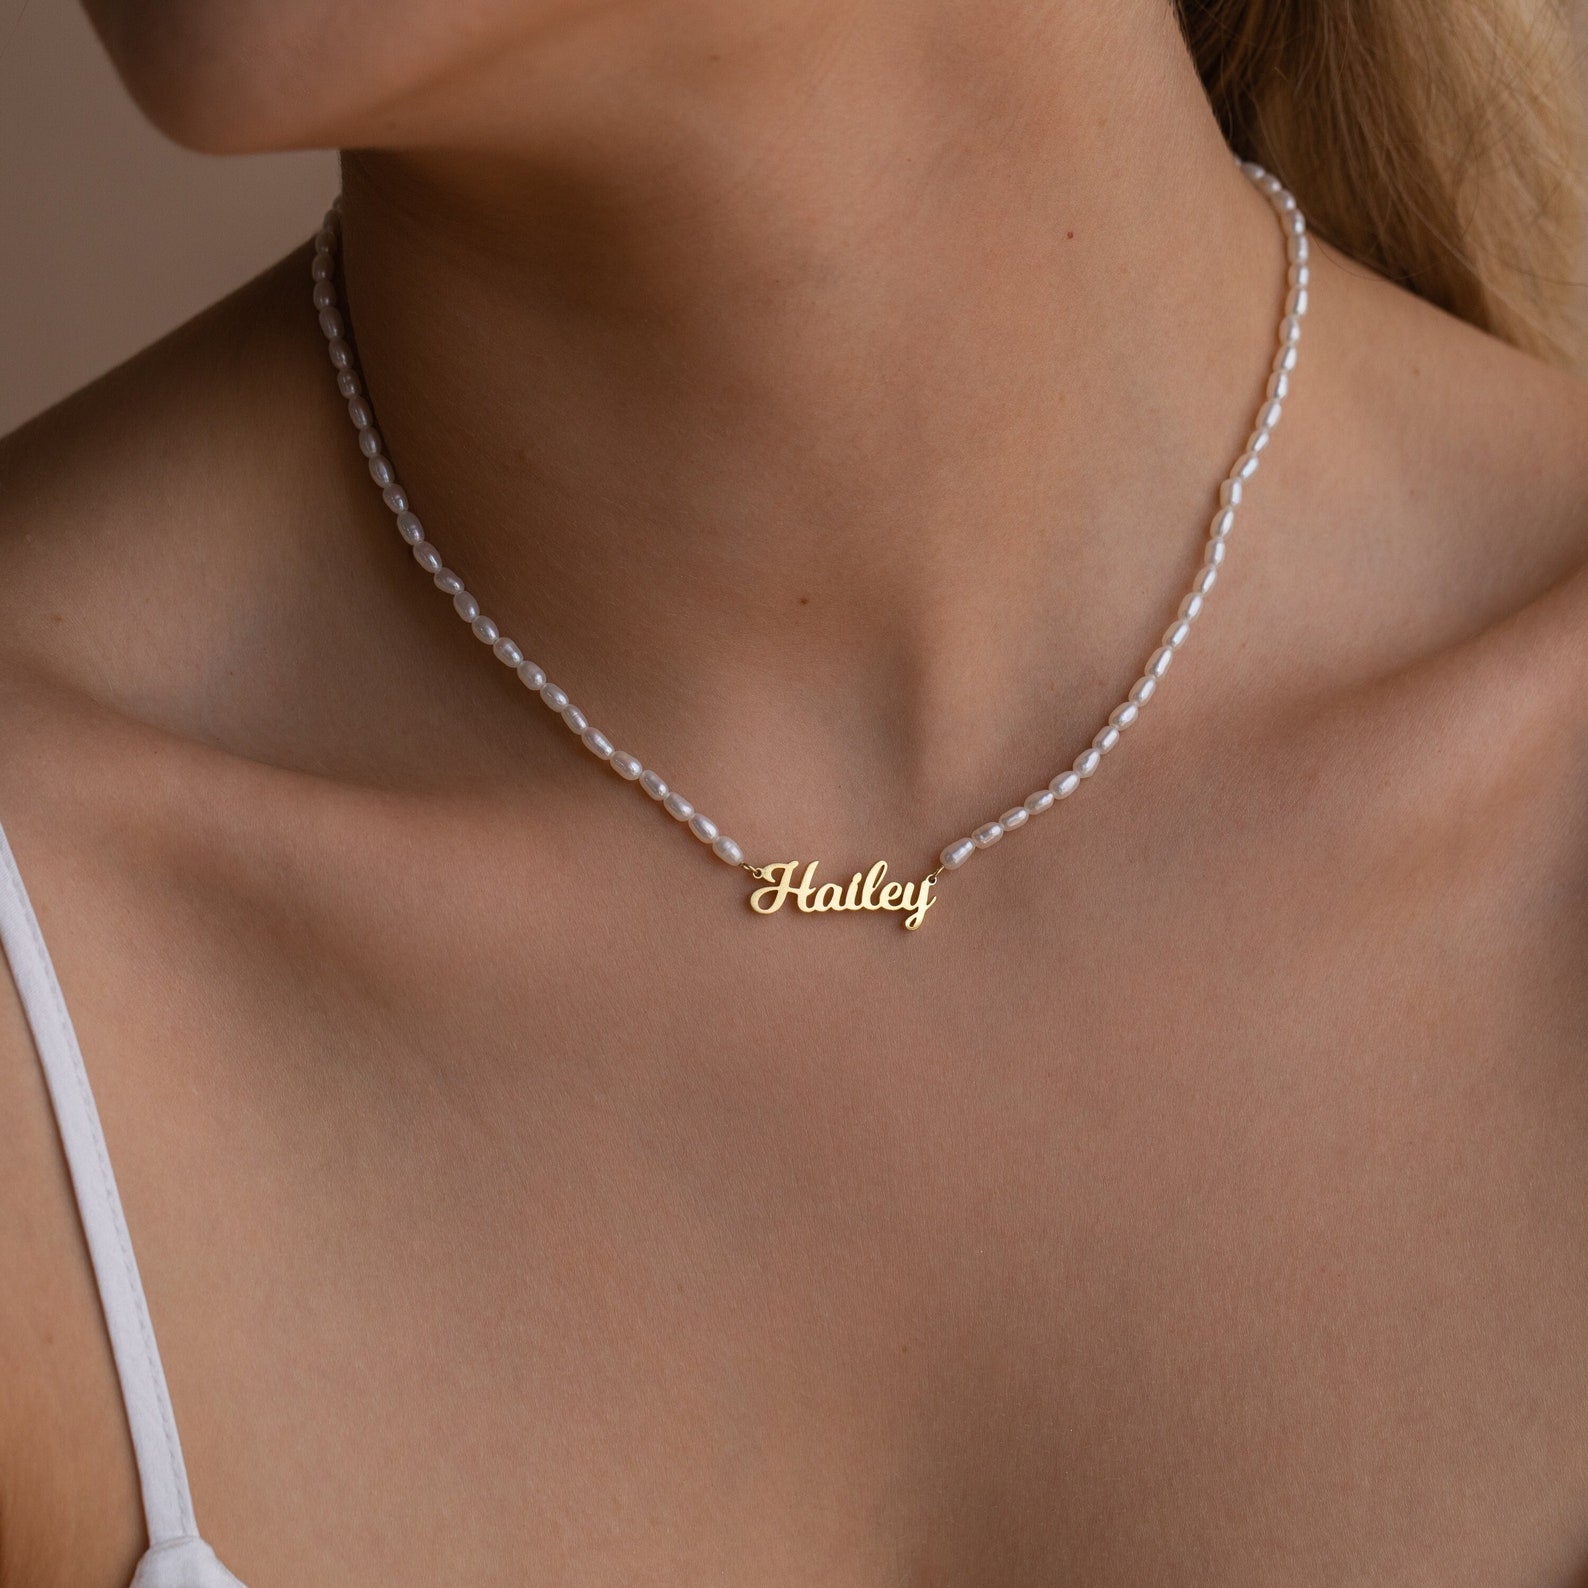 Pearl Necklace with Charm - Personalized